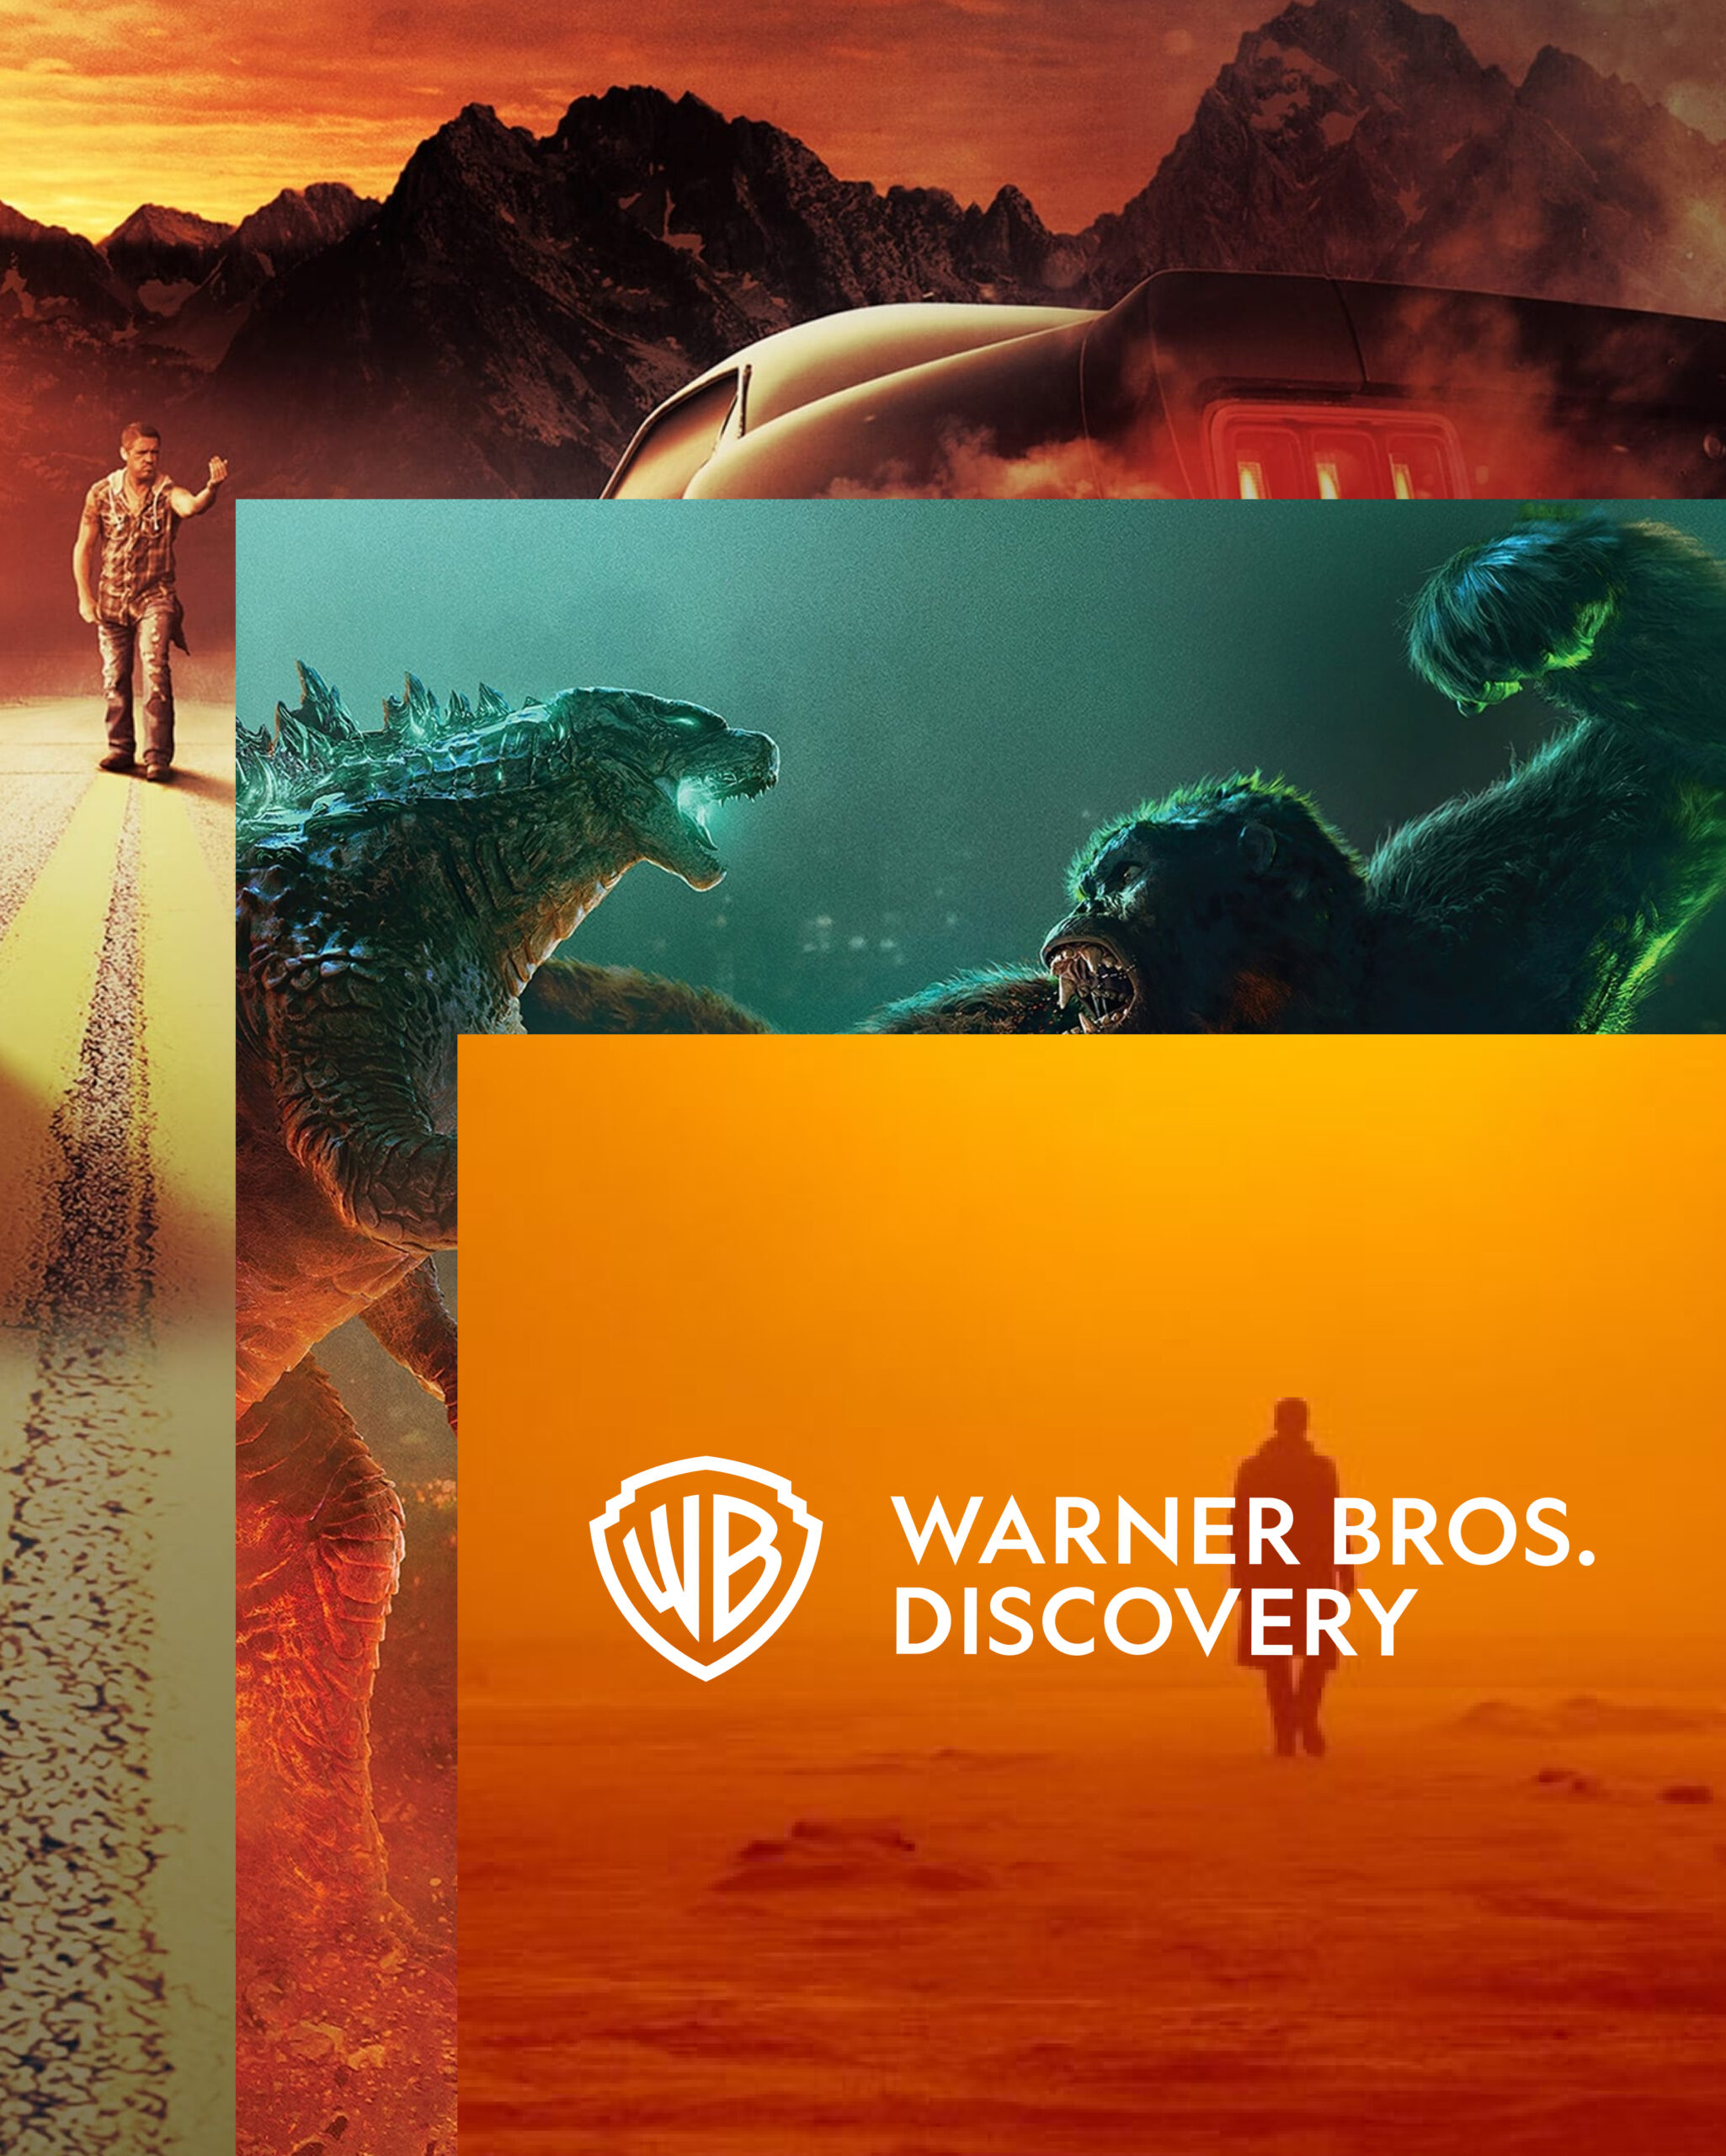 Warner Bros. Discovery's Partnership with Siegel+Gale